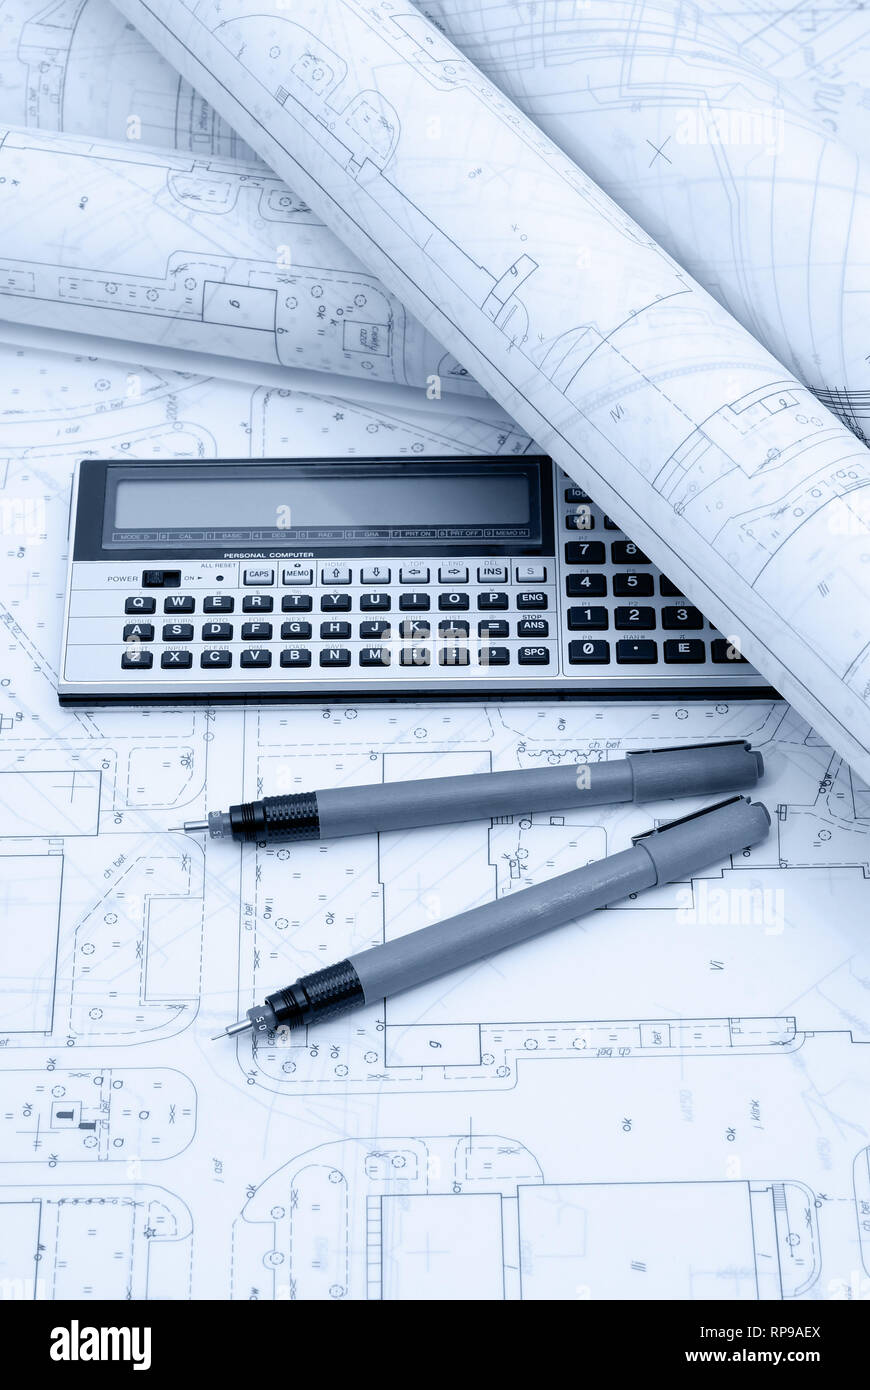 Architectural plans, calculator and drawing utensils. Picture in blue tone. Stock Photo